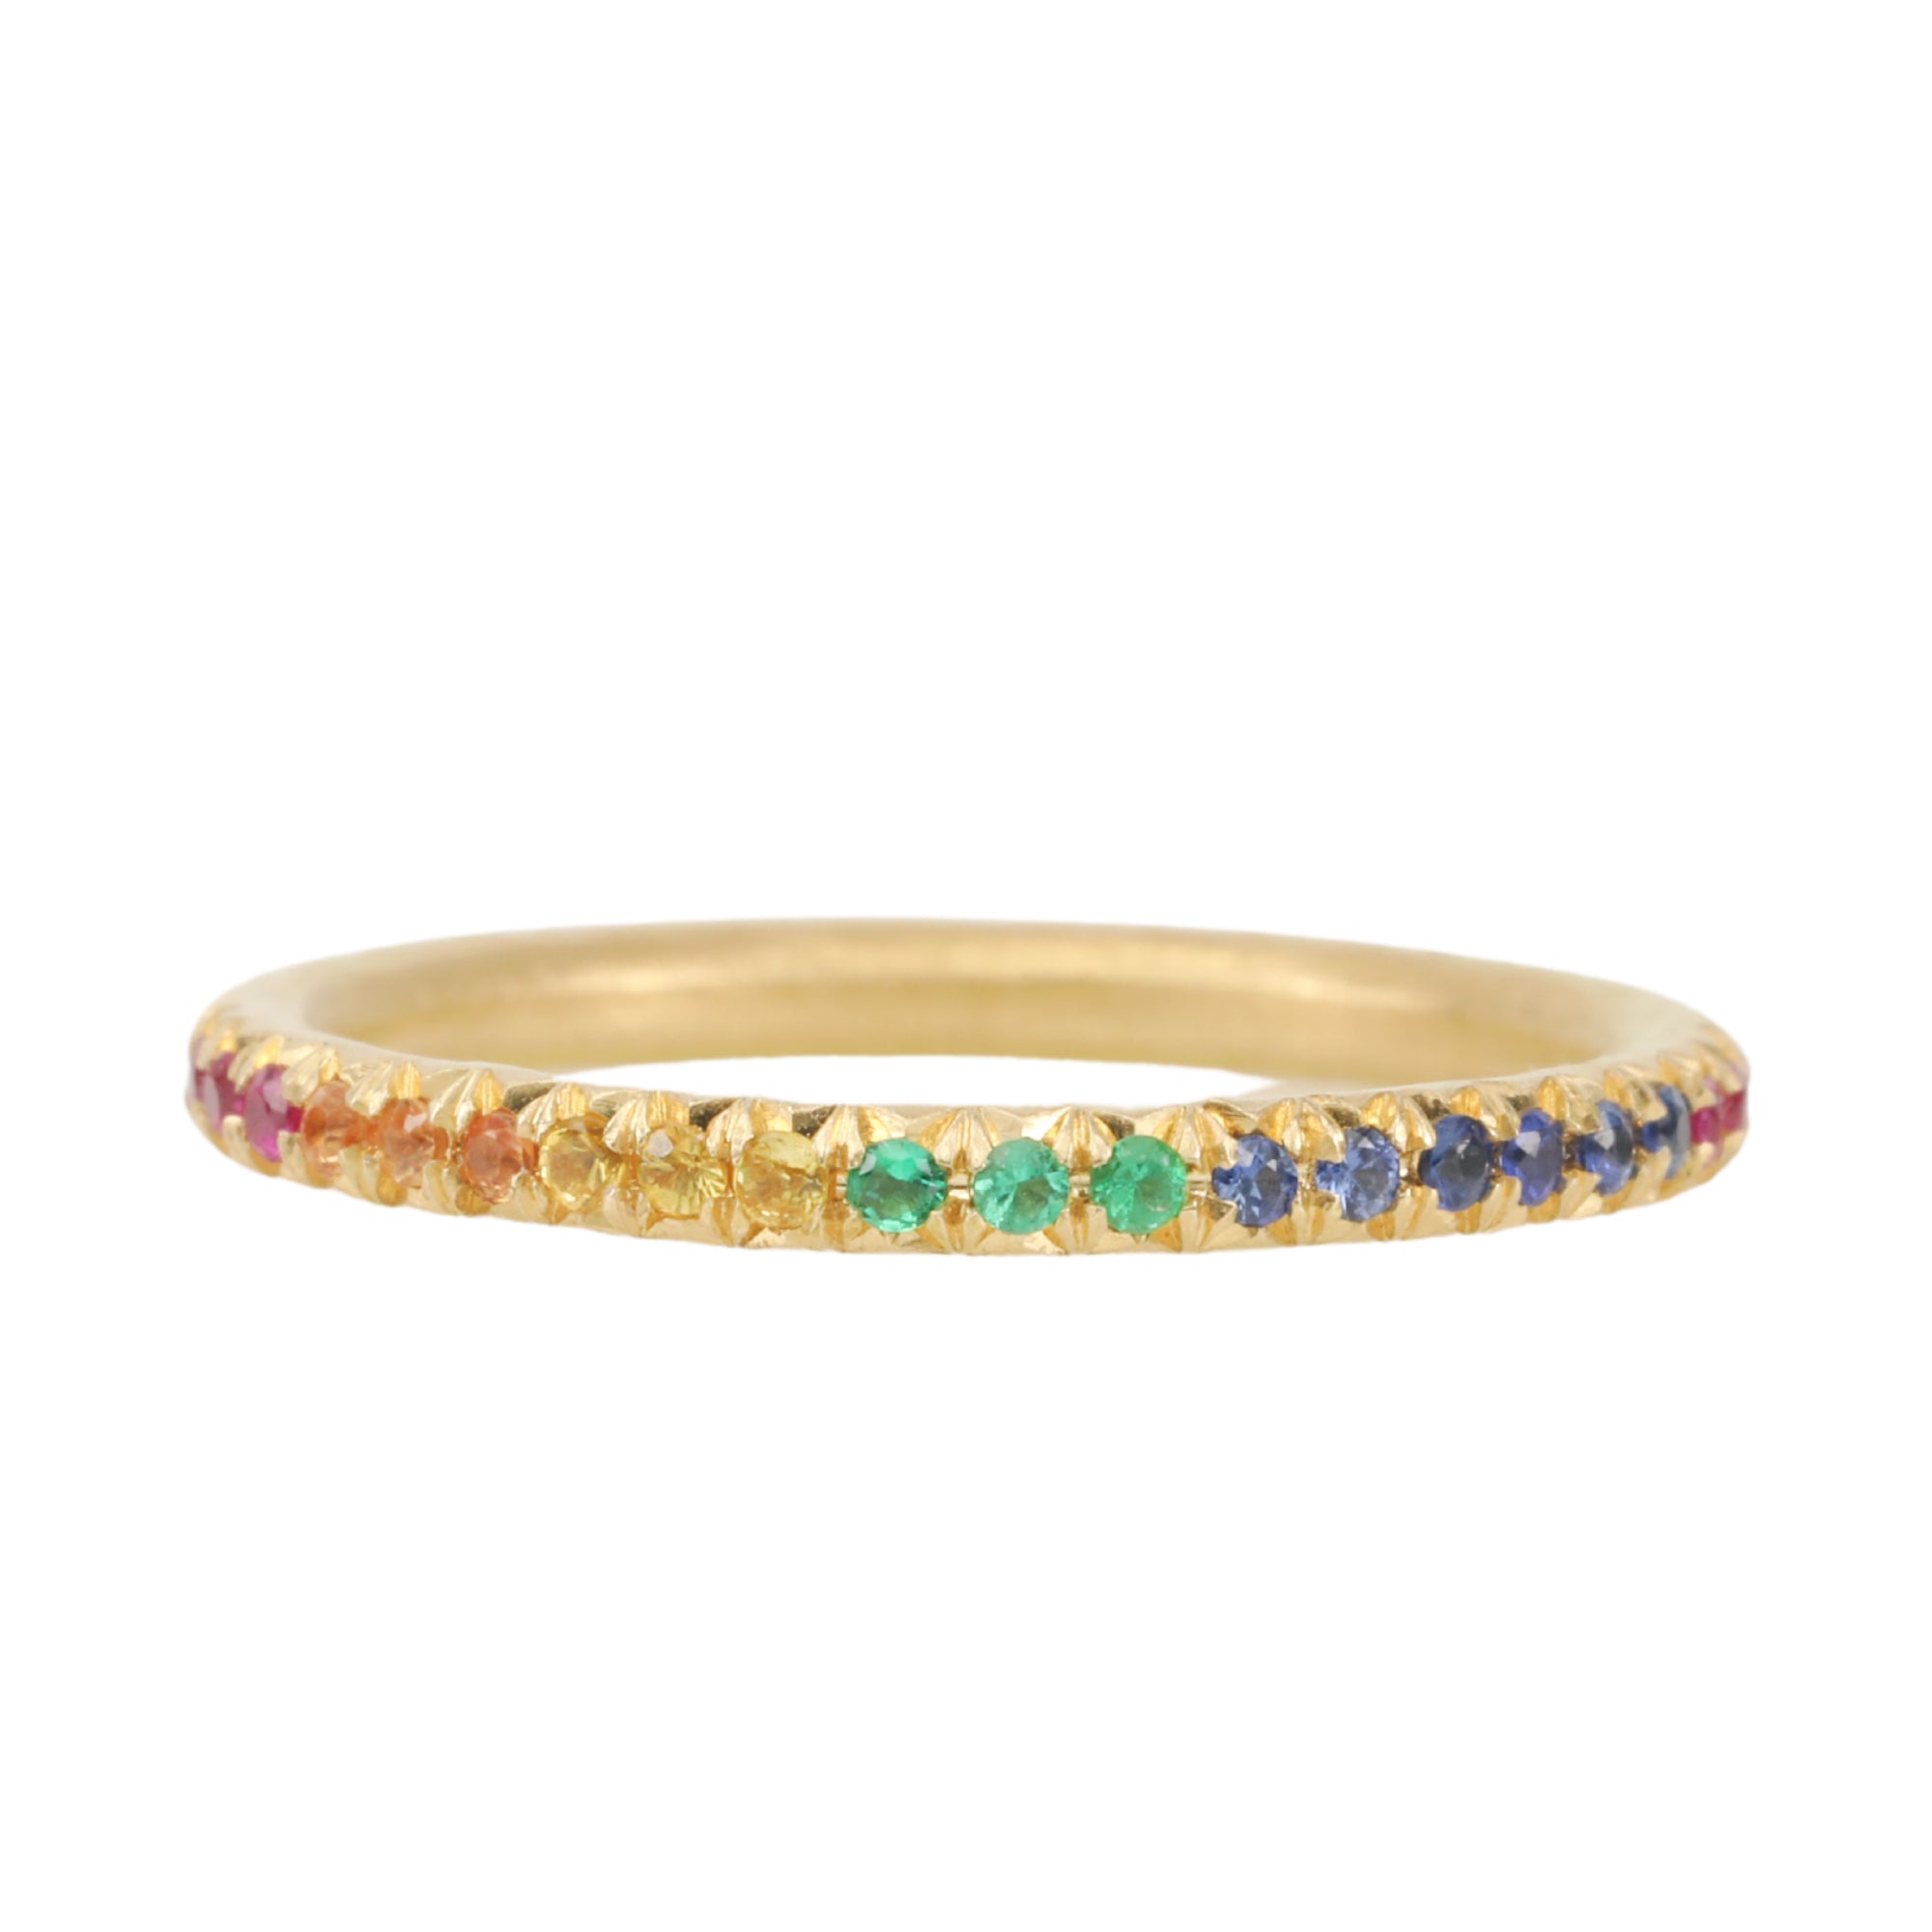 Annie Fensterstock 18K Gold Band with Rainbow Sapphire and Emeralds